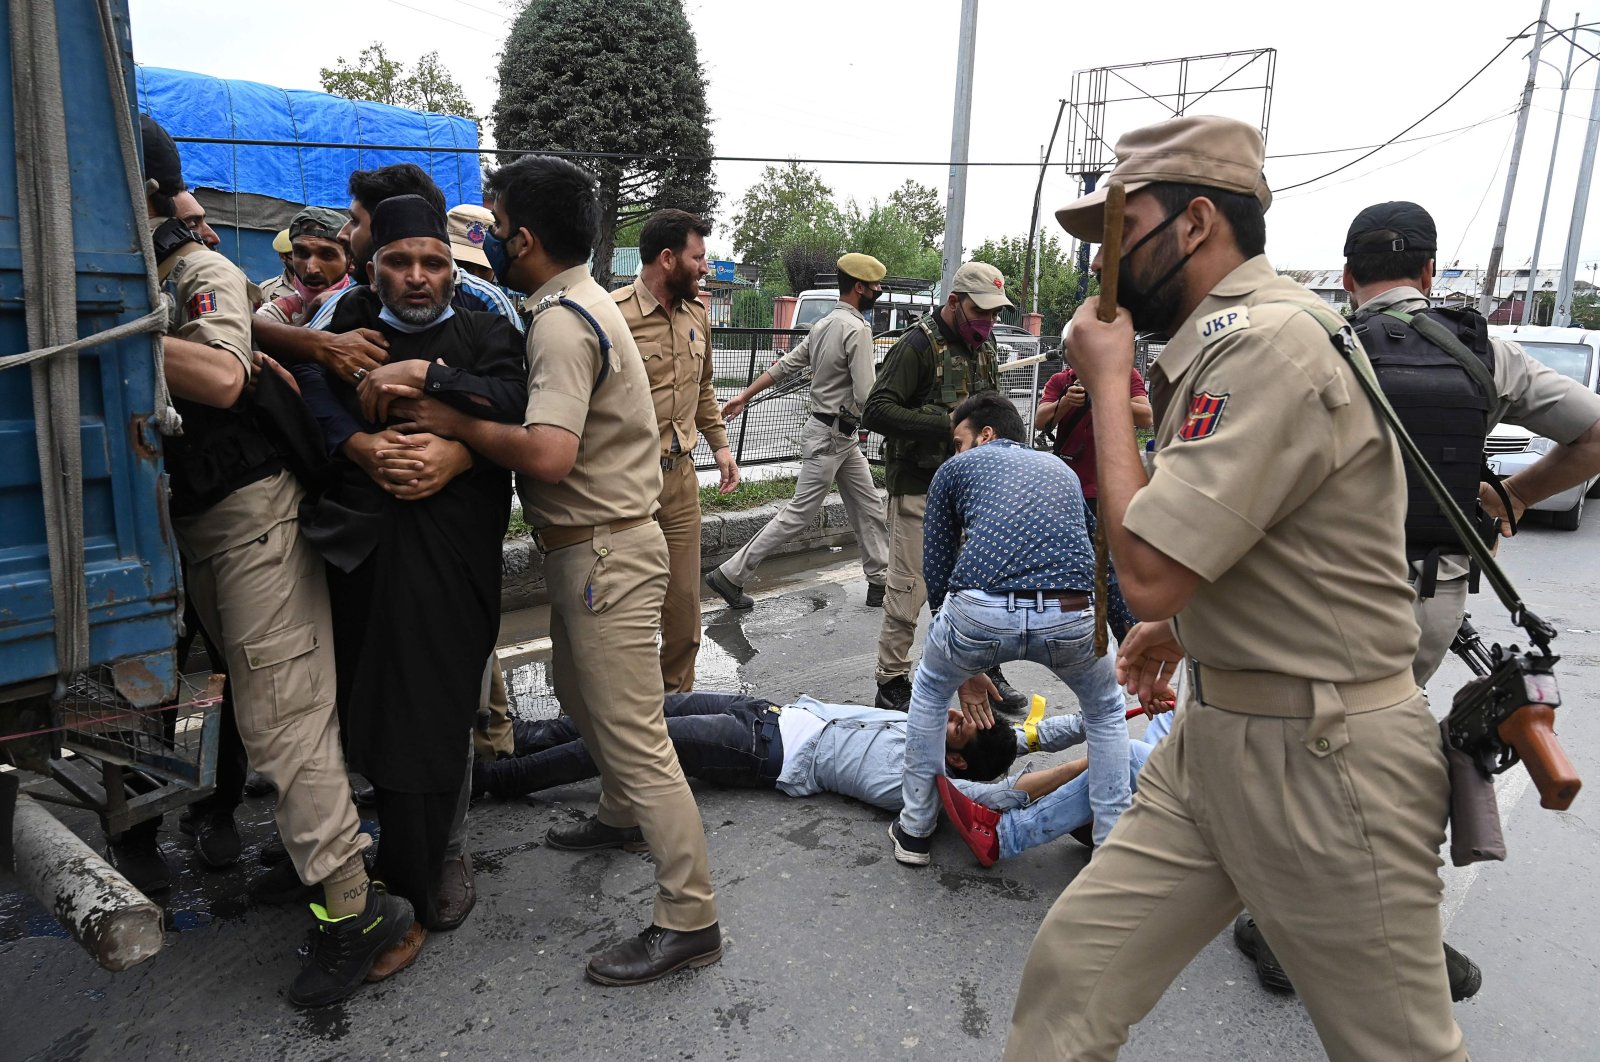 Kashmiri Shiite Muslim men react while Indian police detain them as devotees defy restrictions for a Muharram procession in Srinagar on Aug. 28, 2020. (AFP Photo)